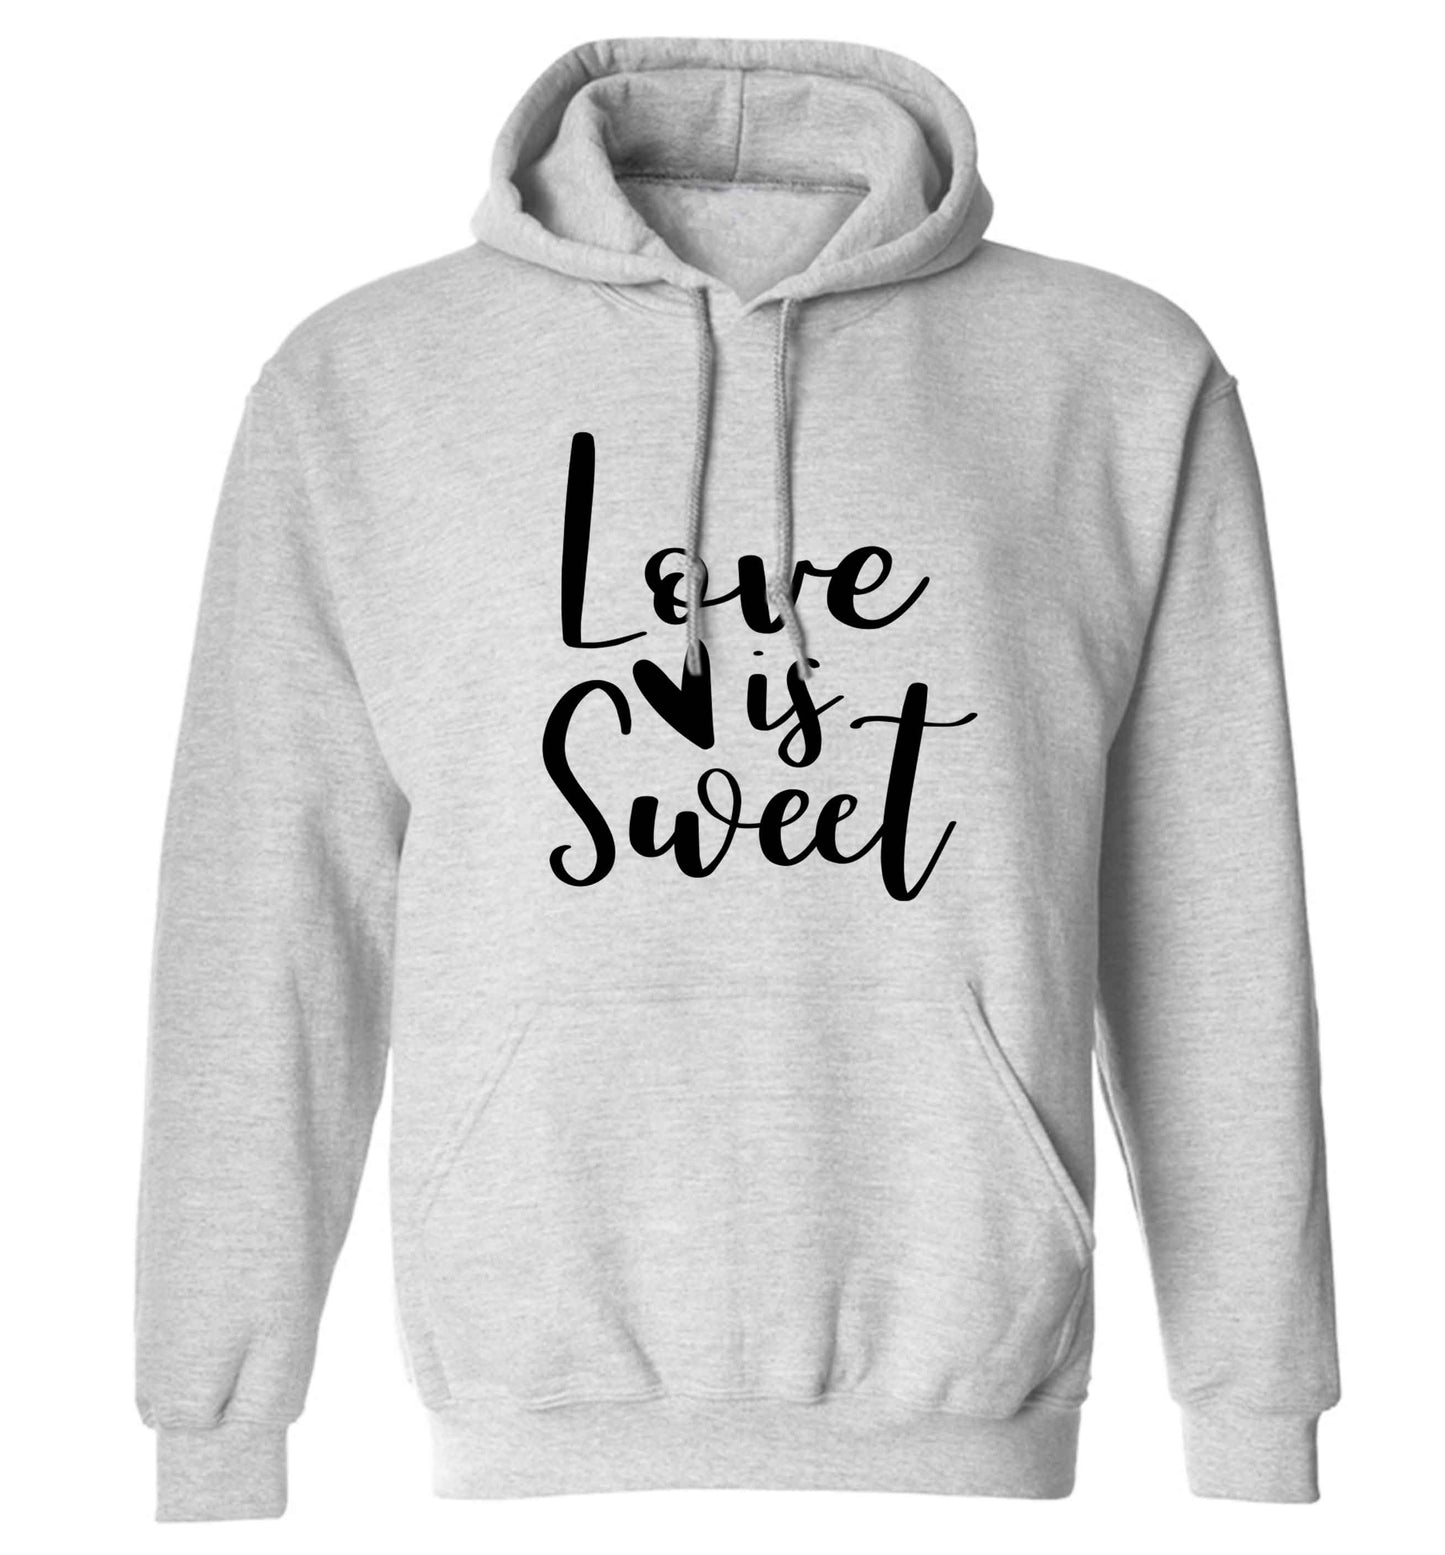 Love really does make the world go round! Ideal for weddings, valentines or just simply to show someone you love them!  adults unisex grey hoodie 2XL